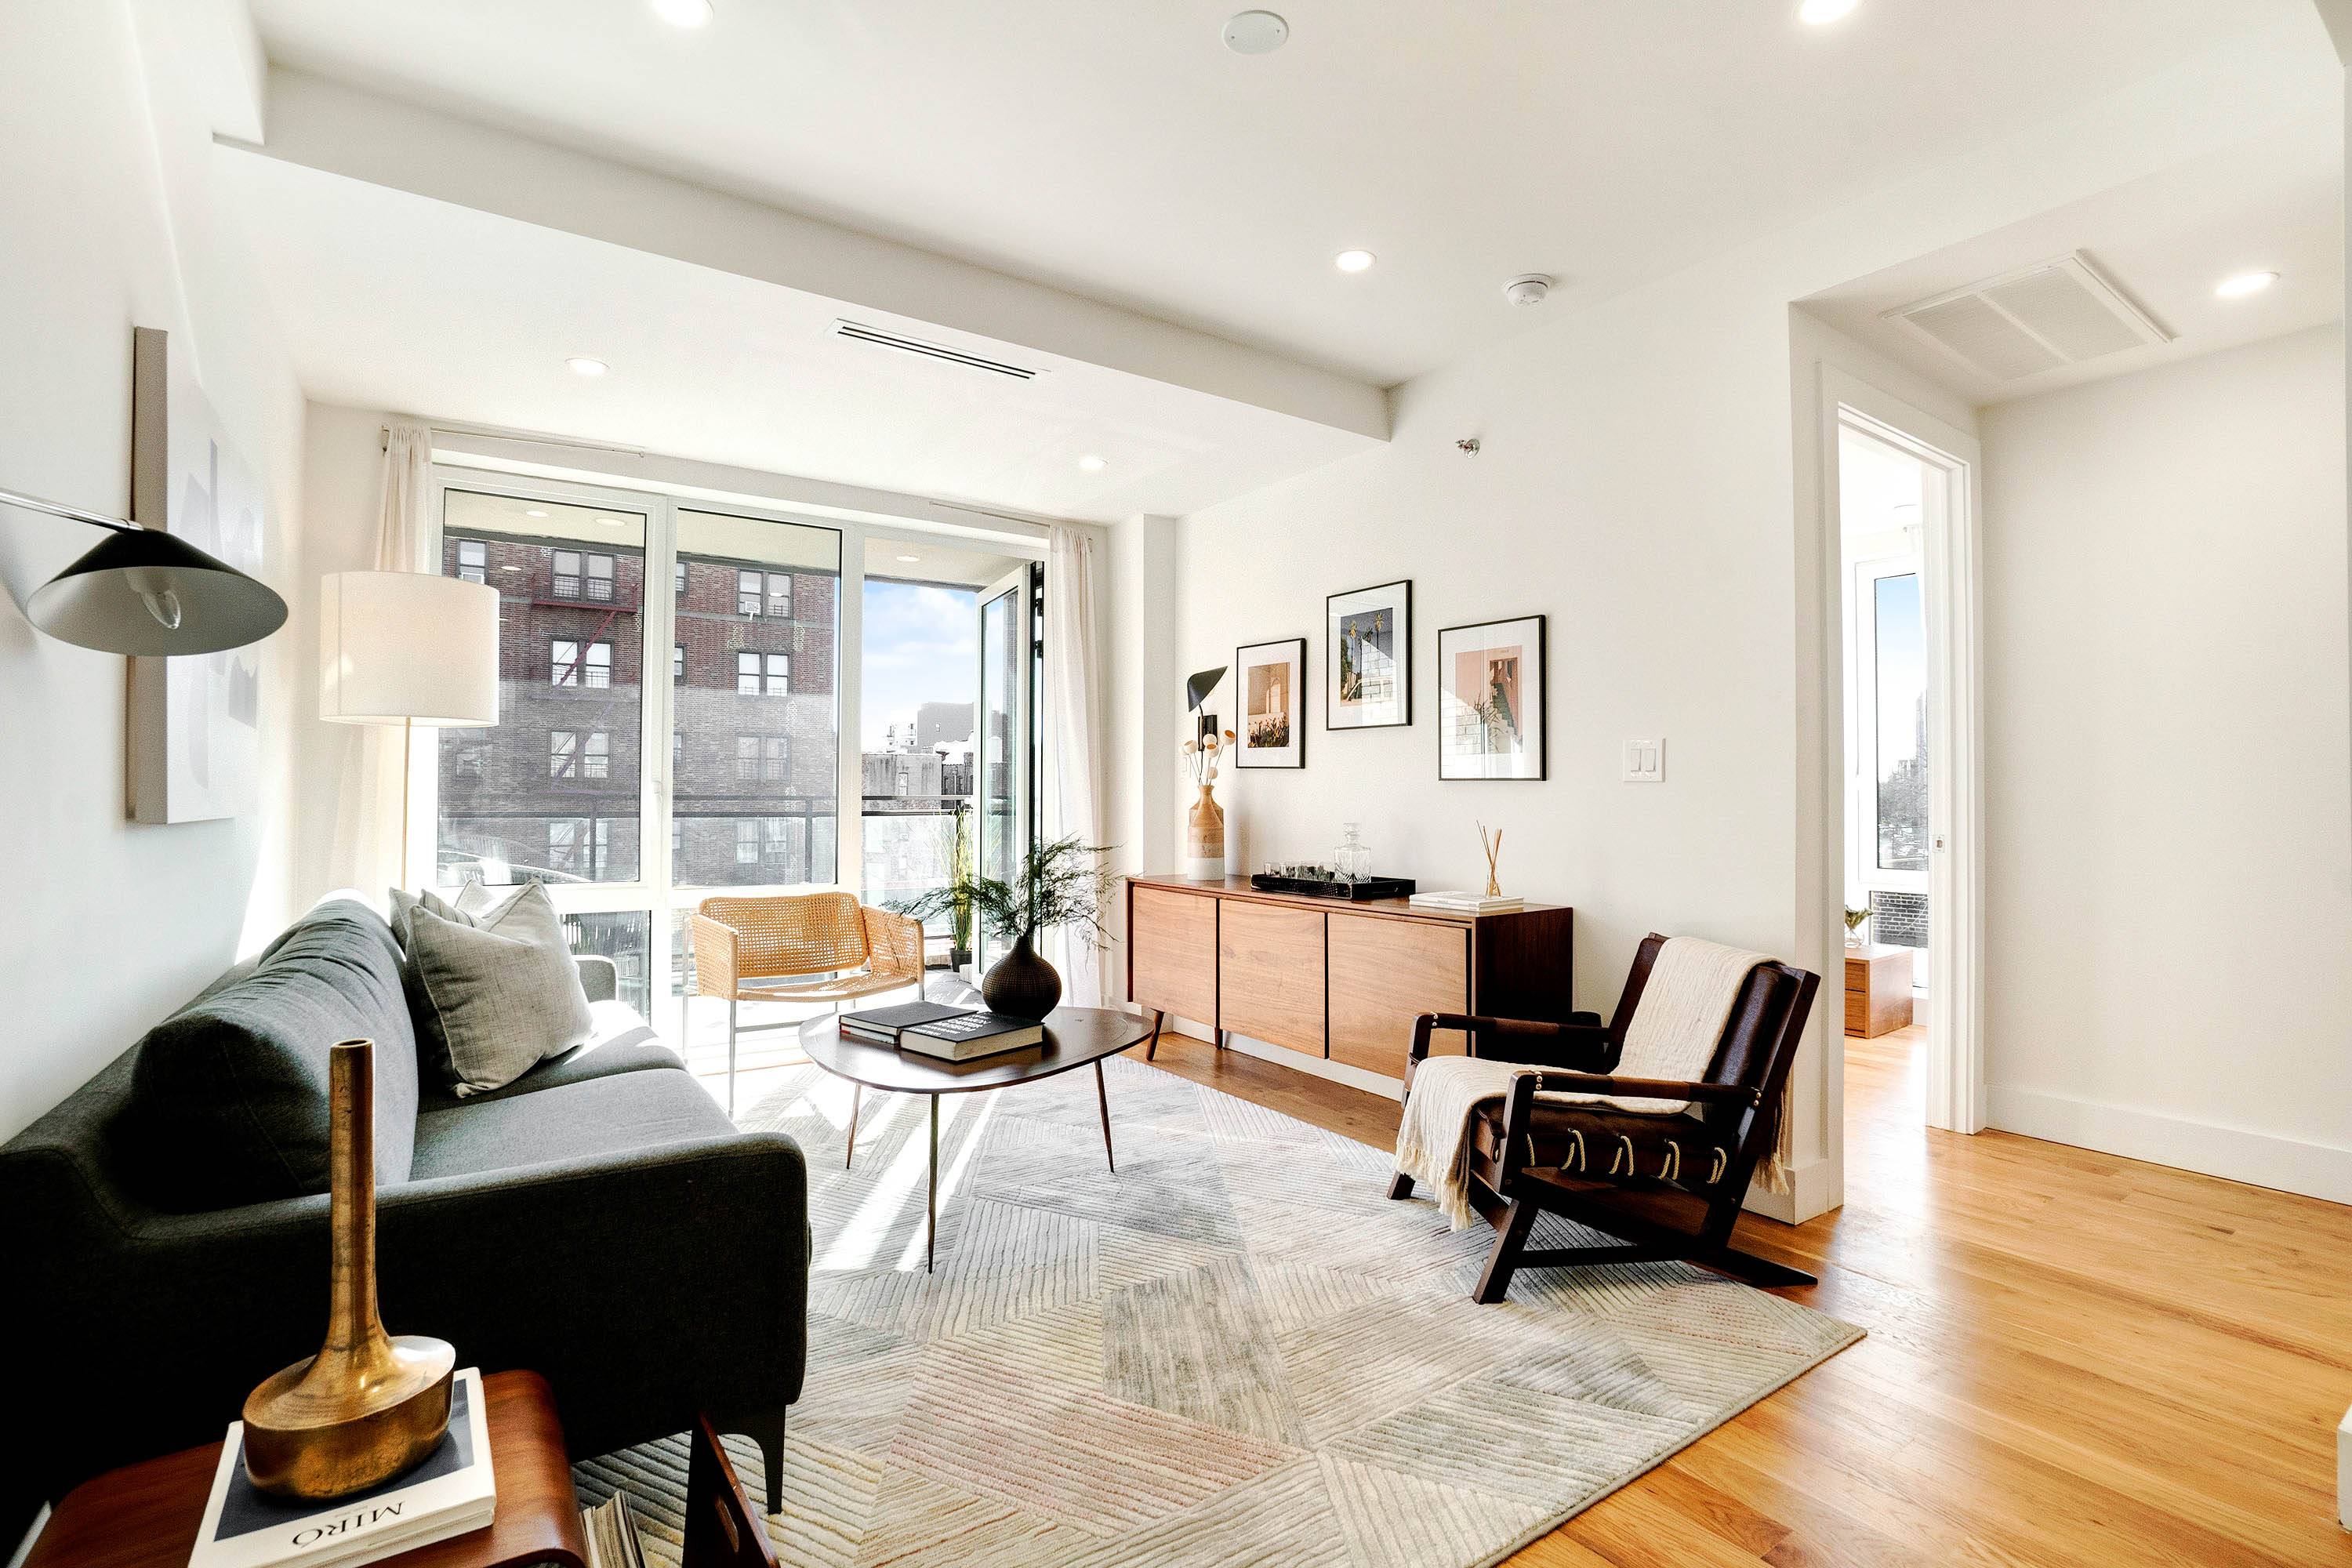 No Fee 3 Bed 2 Bath The Cambridge located at 2155 Caton Ave is a finely detailed 30 unit boutique rental building in Prospect Lefferts Garden, Brooklyn.